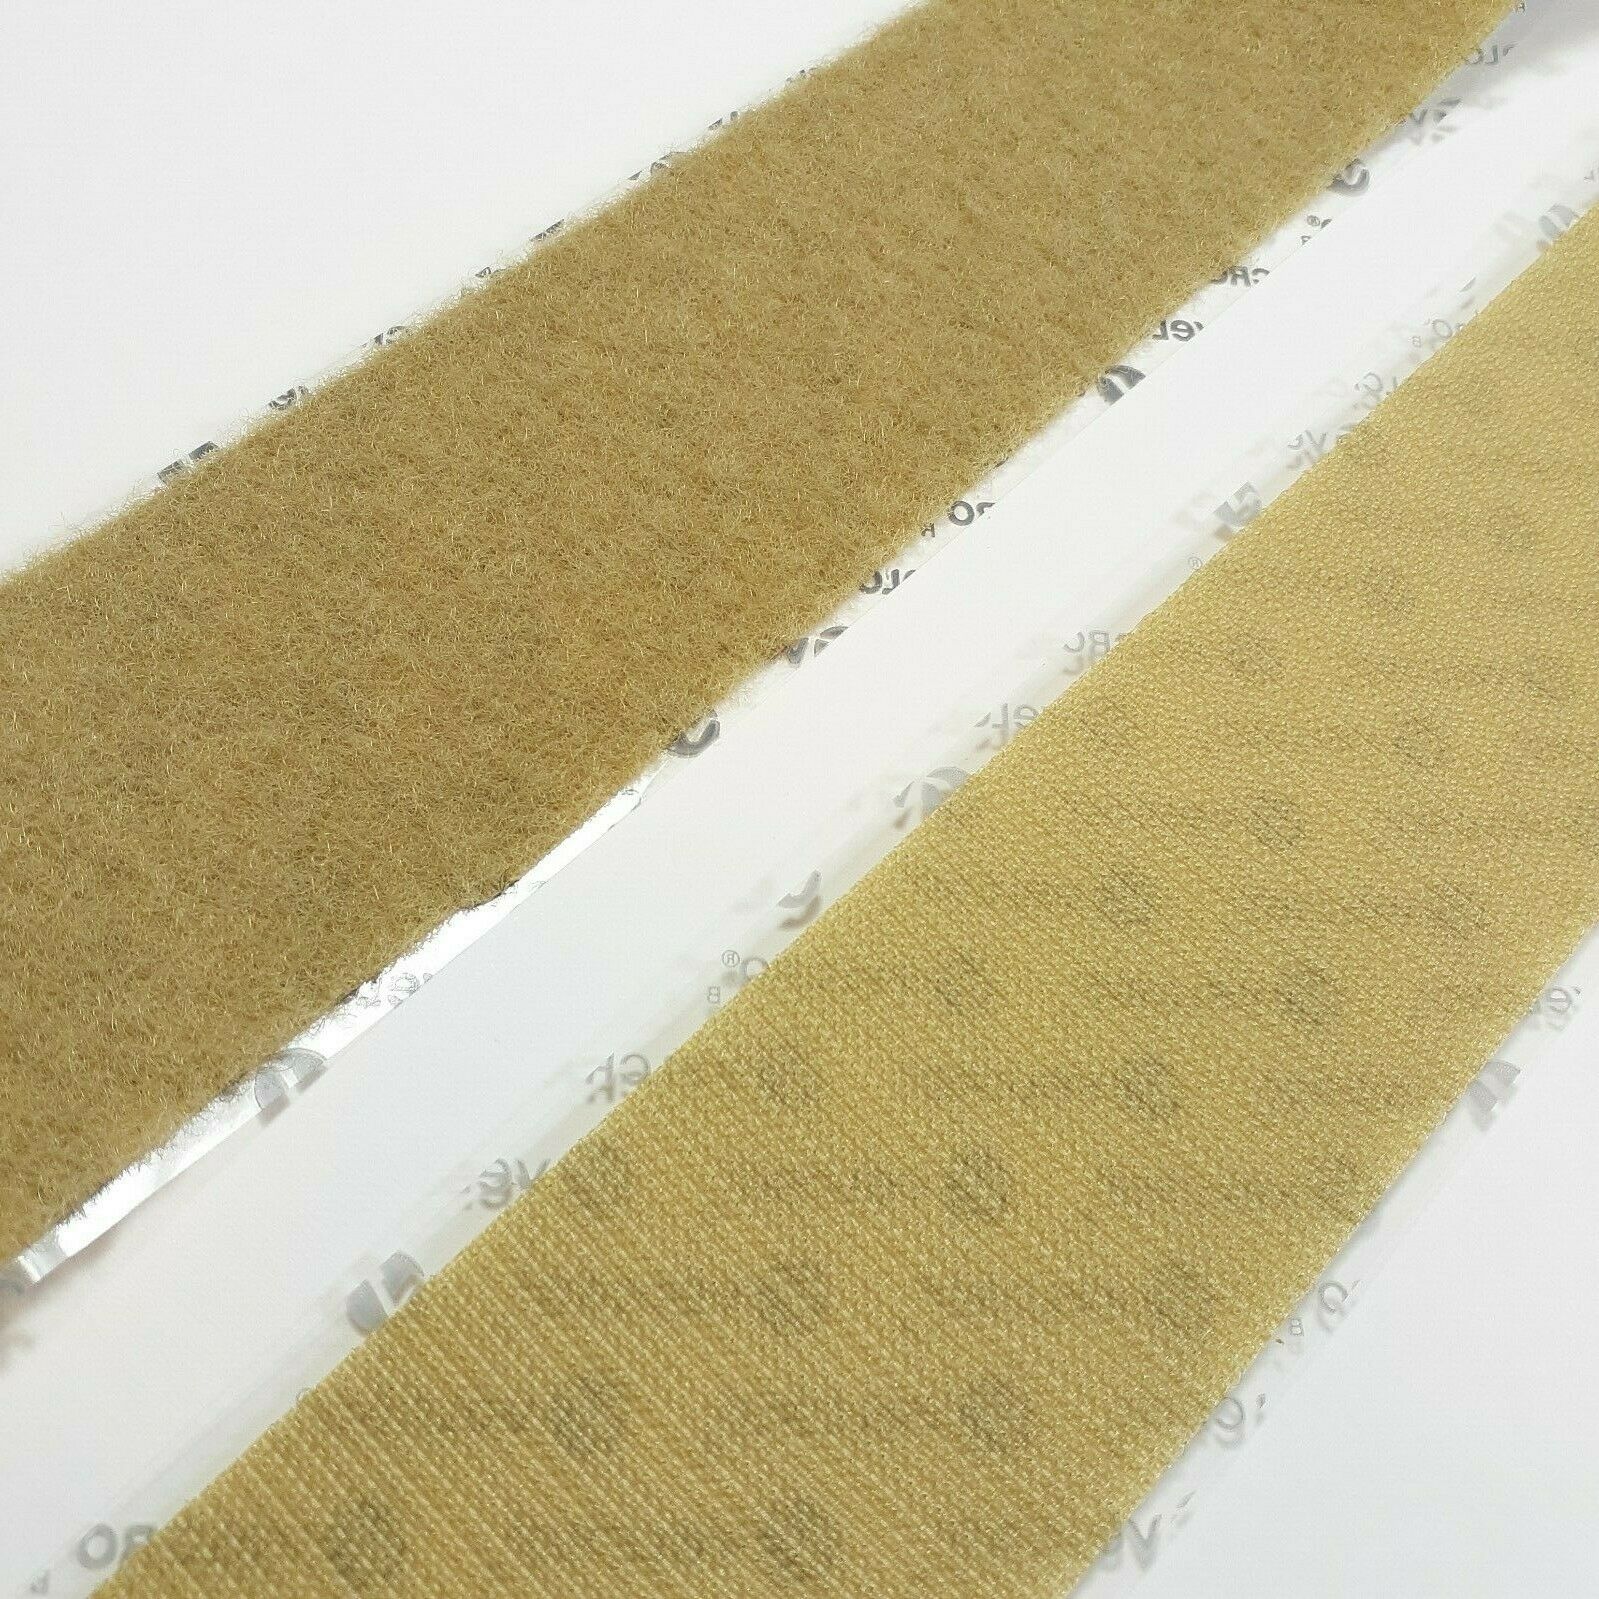 1" Wide Beige Velcro® Brand High Tack Self Adhesive Tape Strip Set - 36" Inches